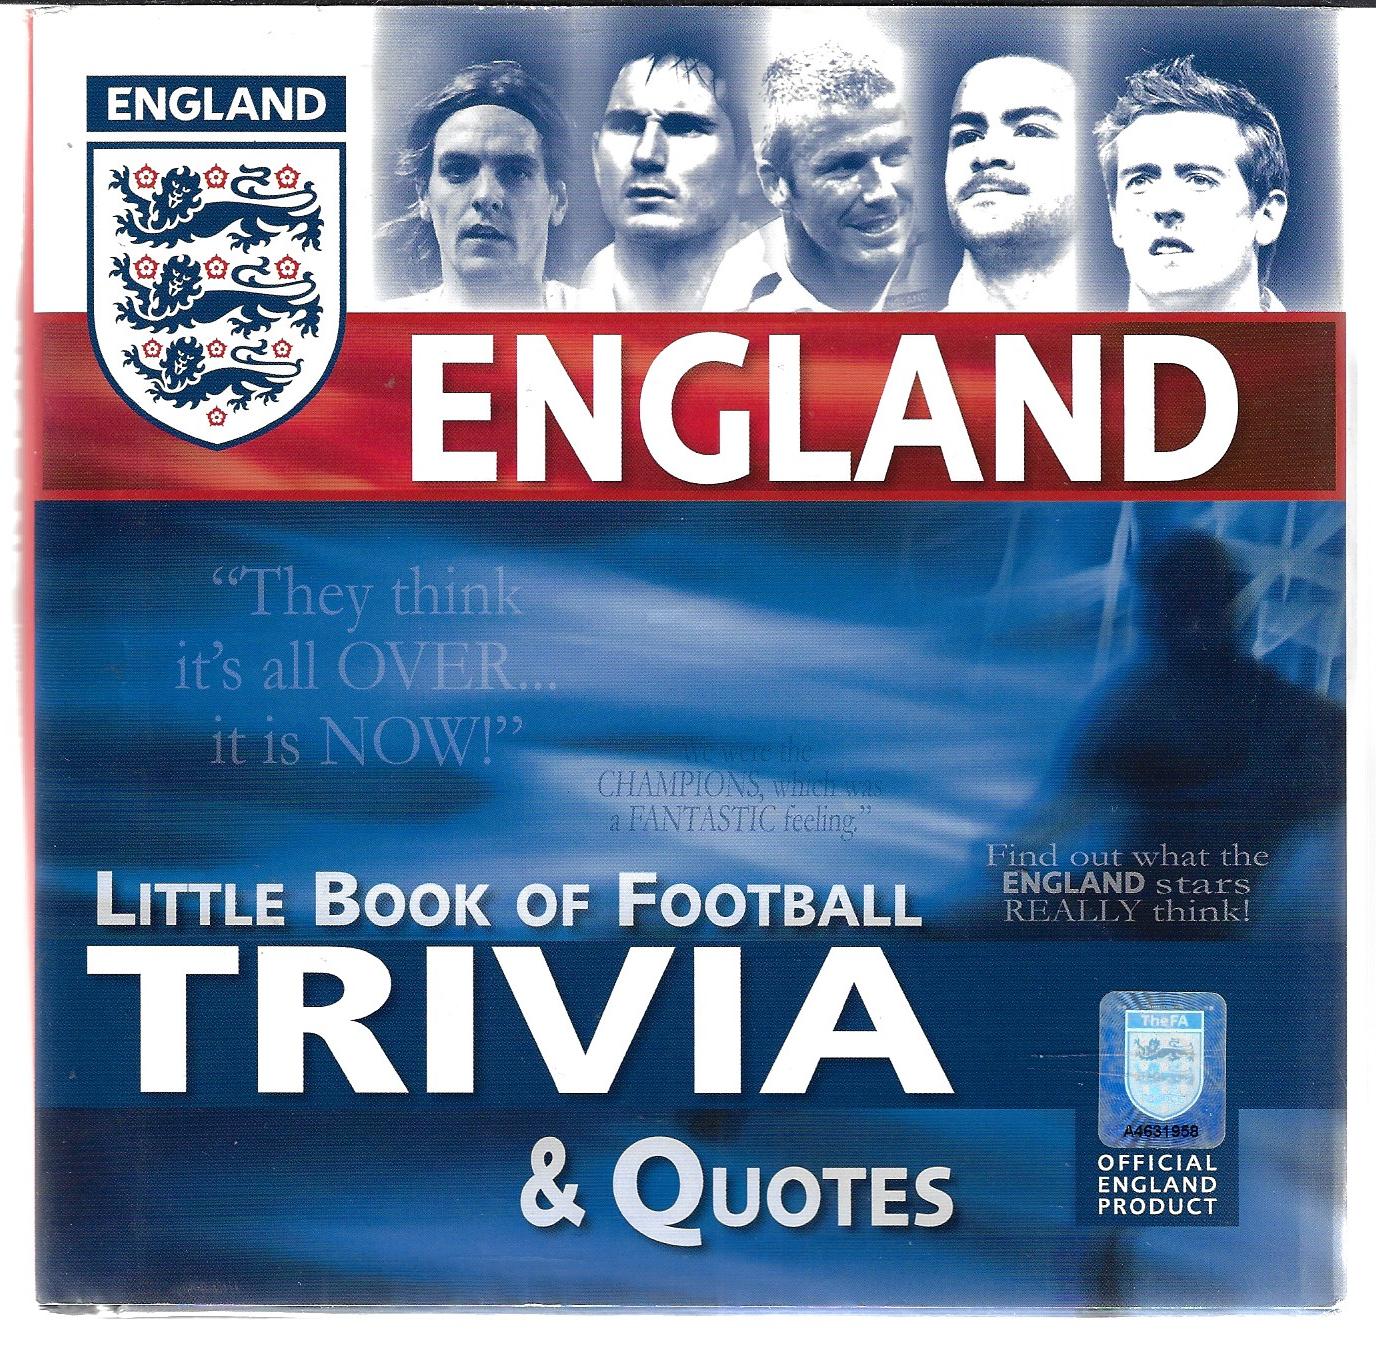 Reeves, John - England little book of football trivia & quotes